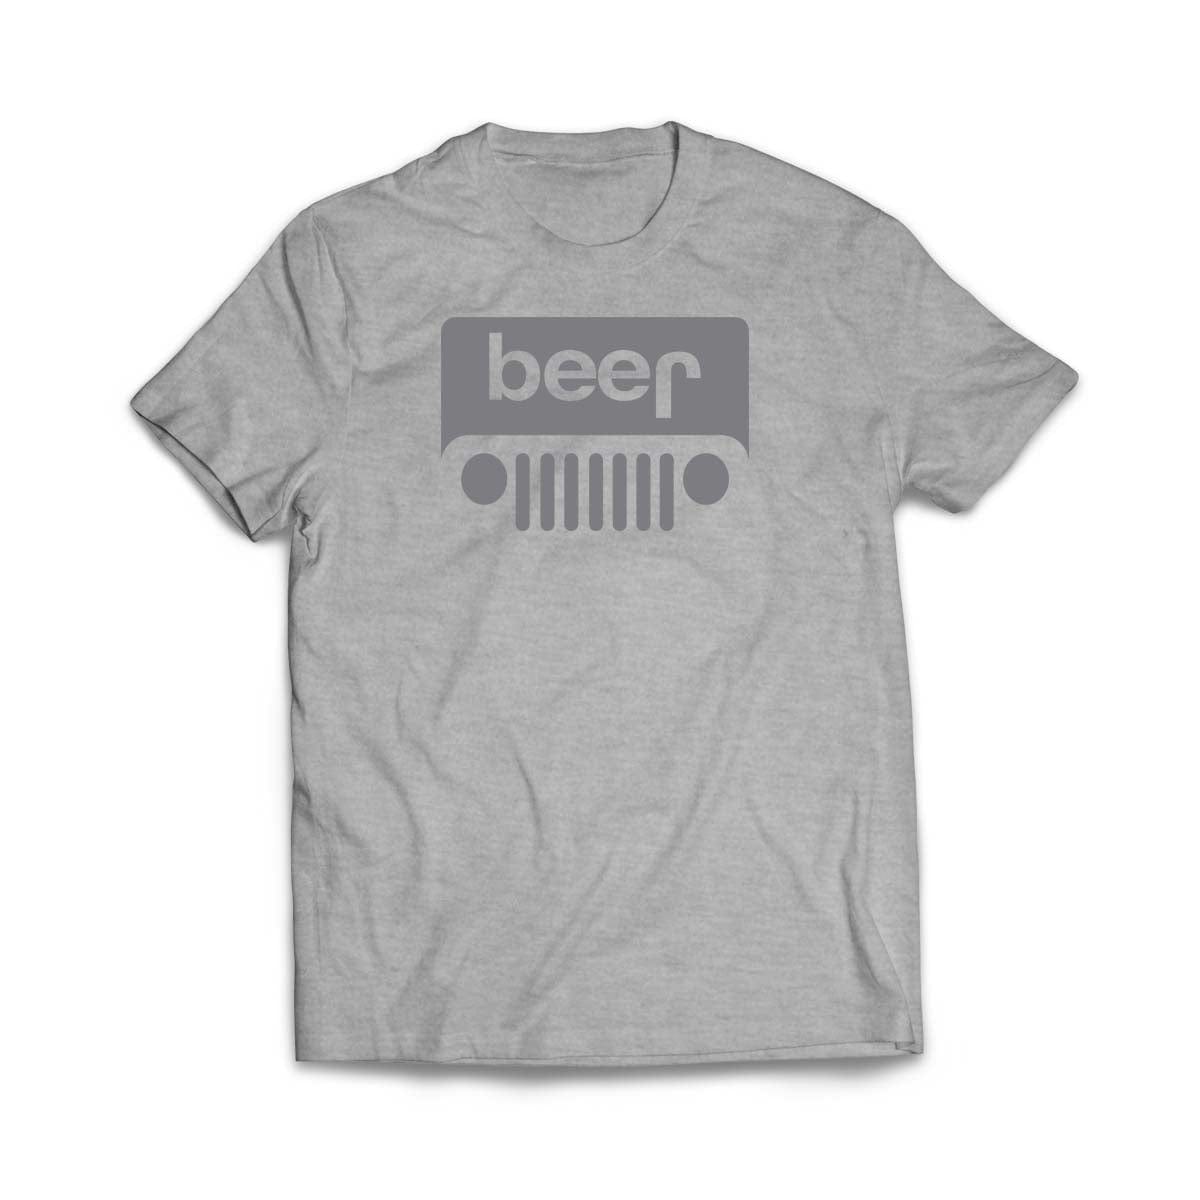 Beer/Jeep T-Shirt